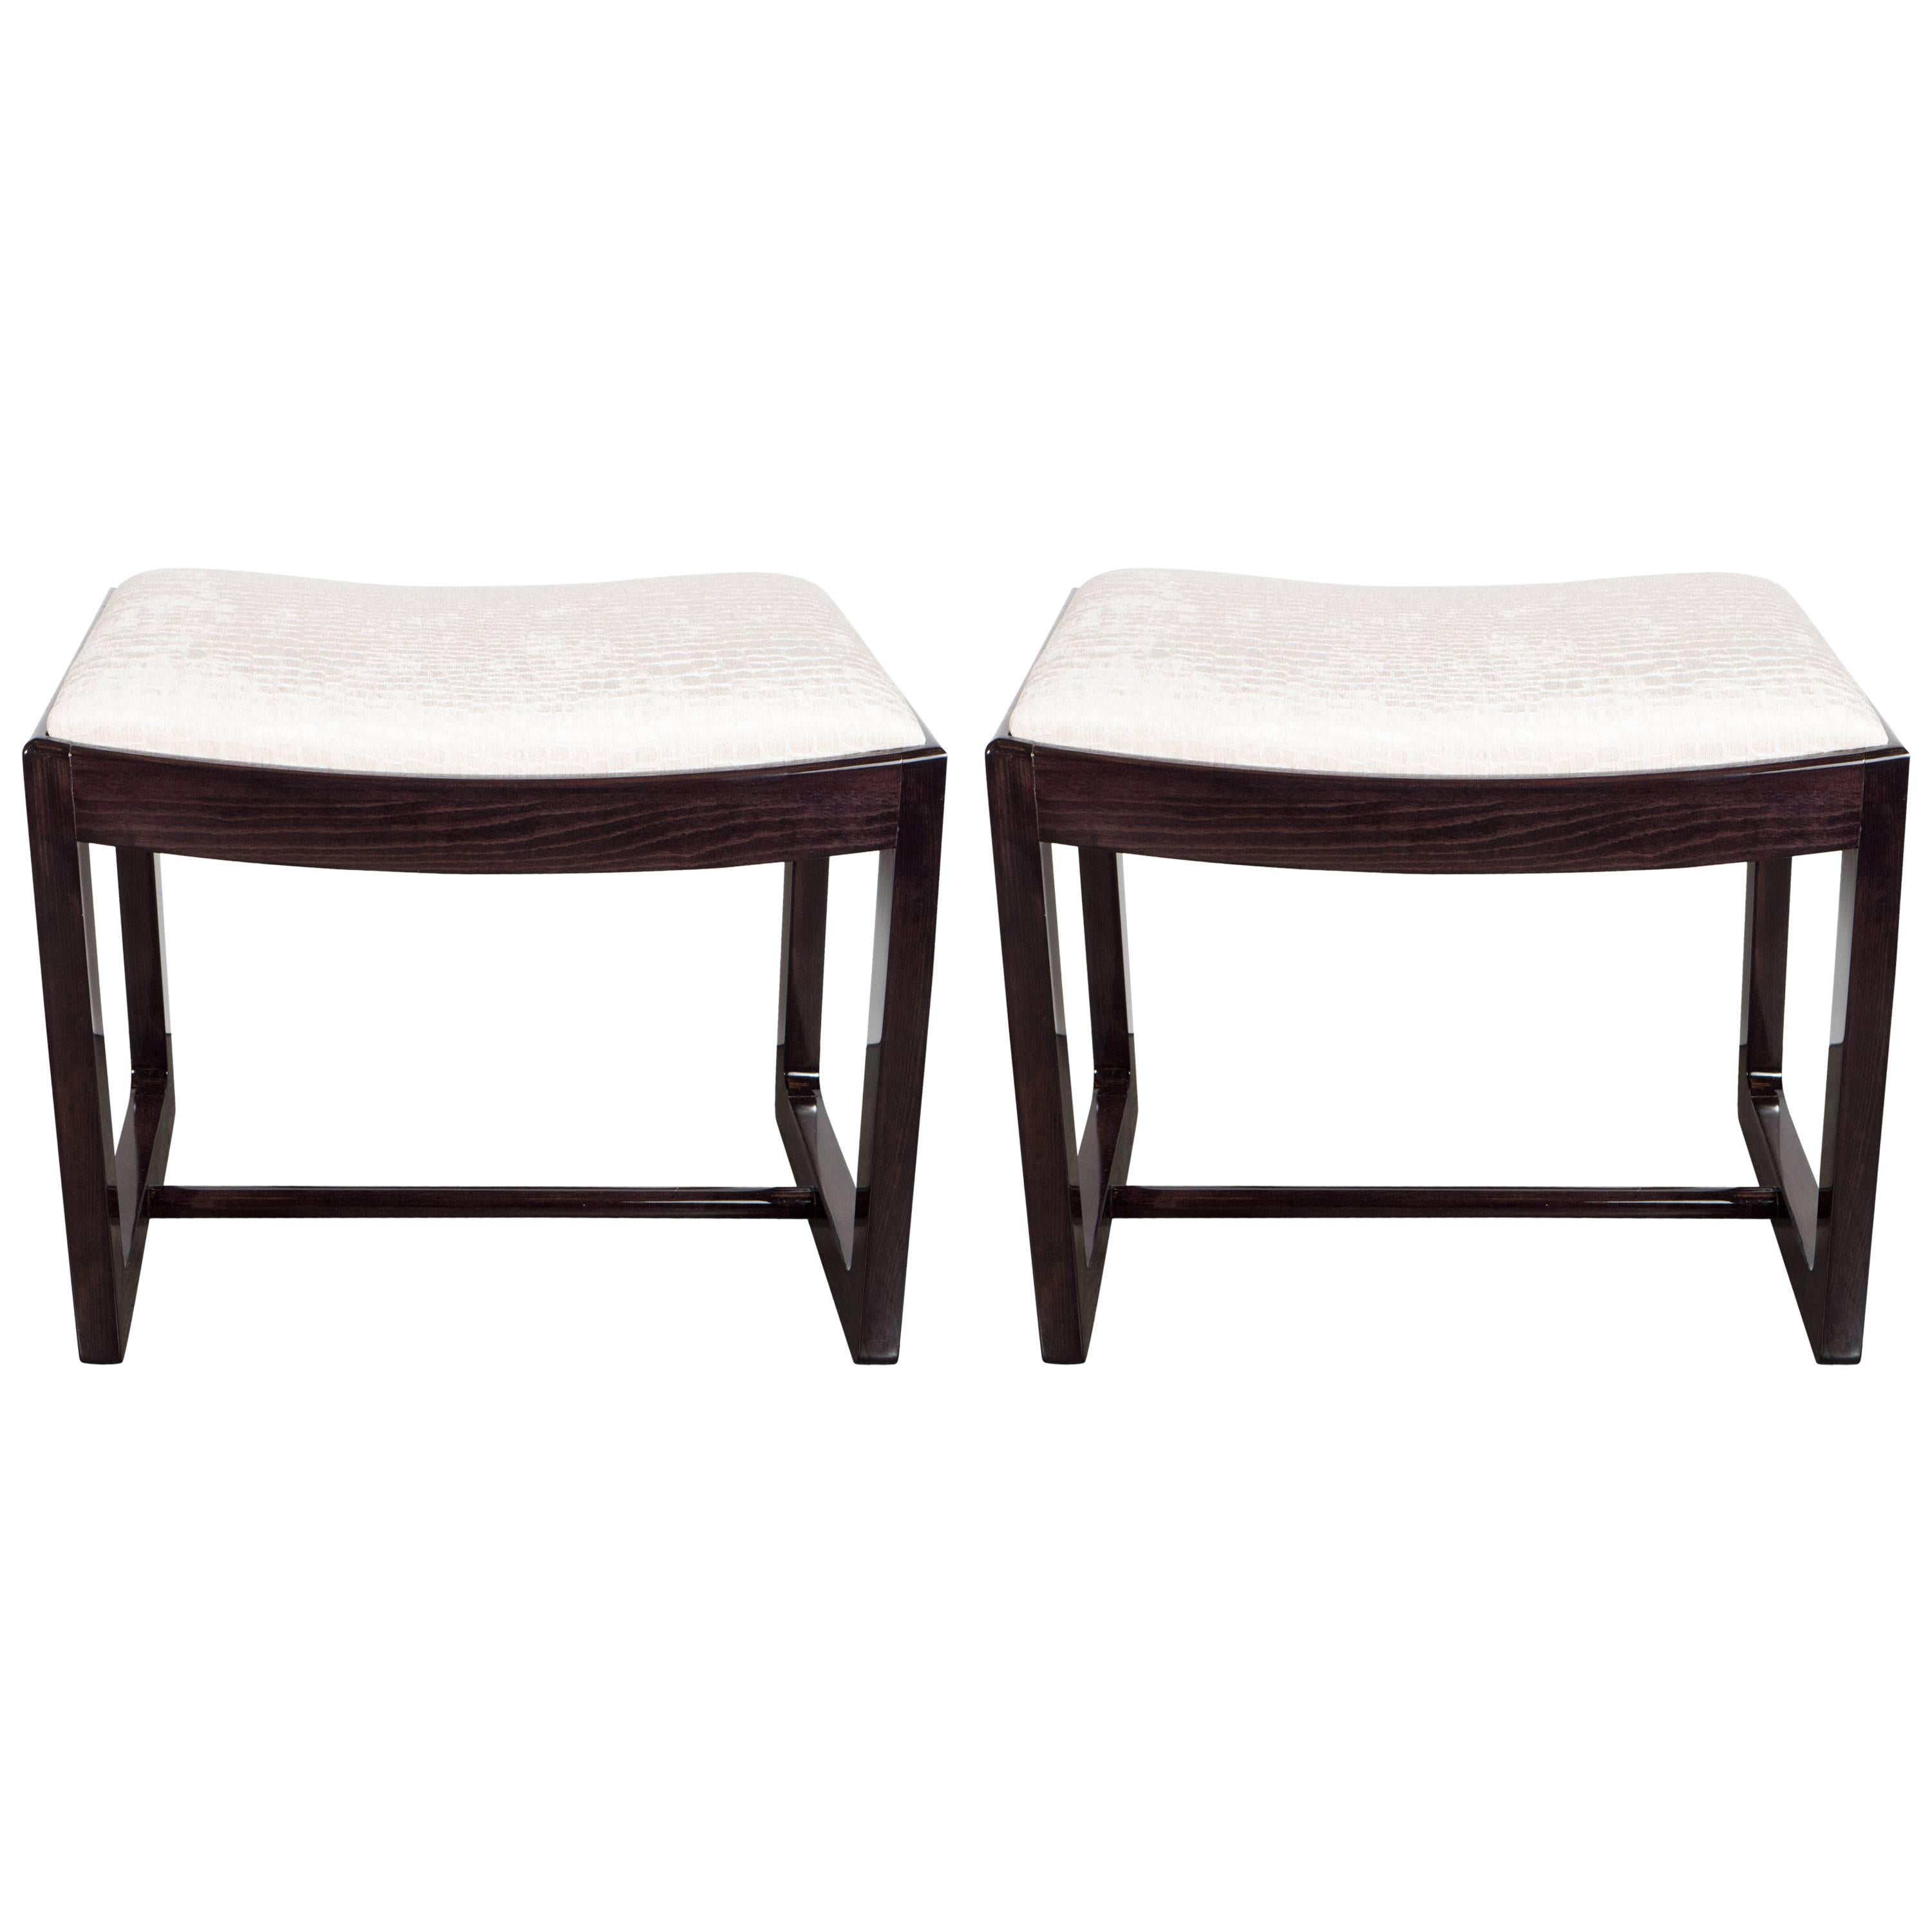 Pair of Mid-Century Modernist Curved Seat Stool or Ottoman